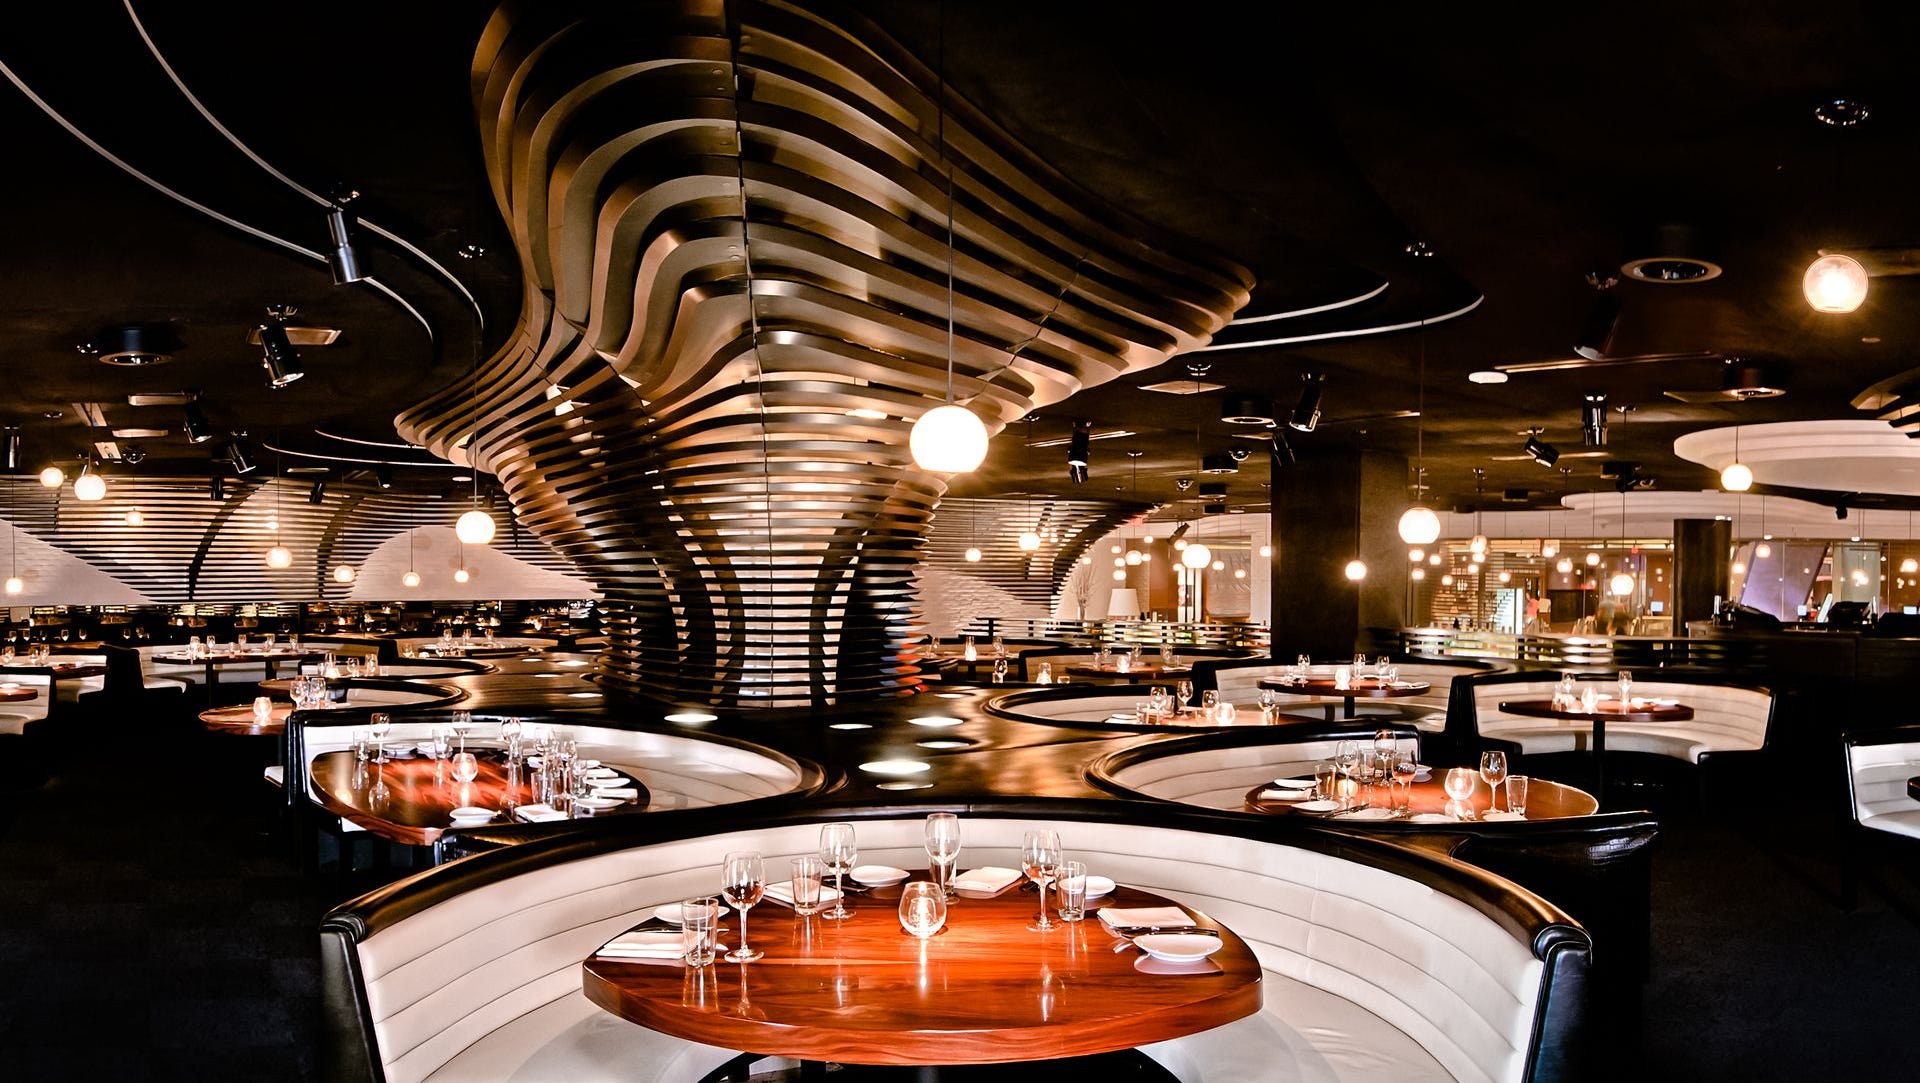 STK Steakhouse opens in Old Town Scottsdale. Here's a look at the menu